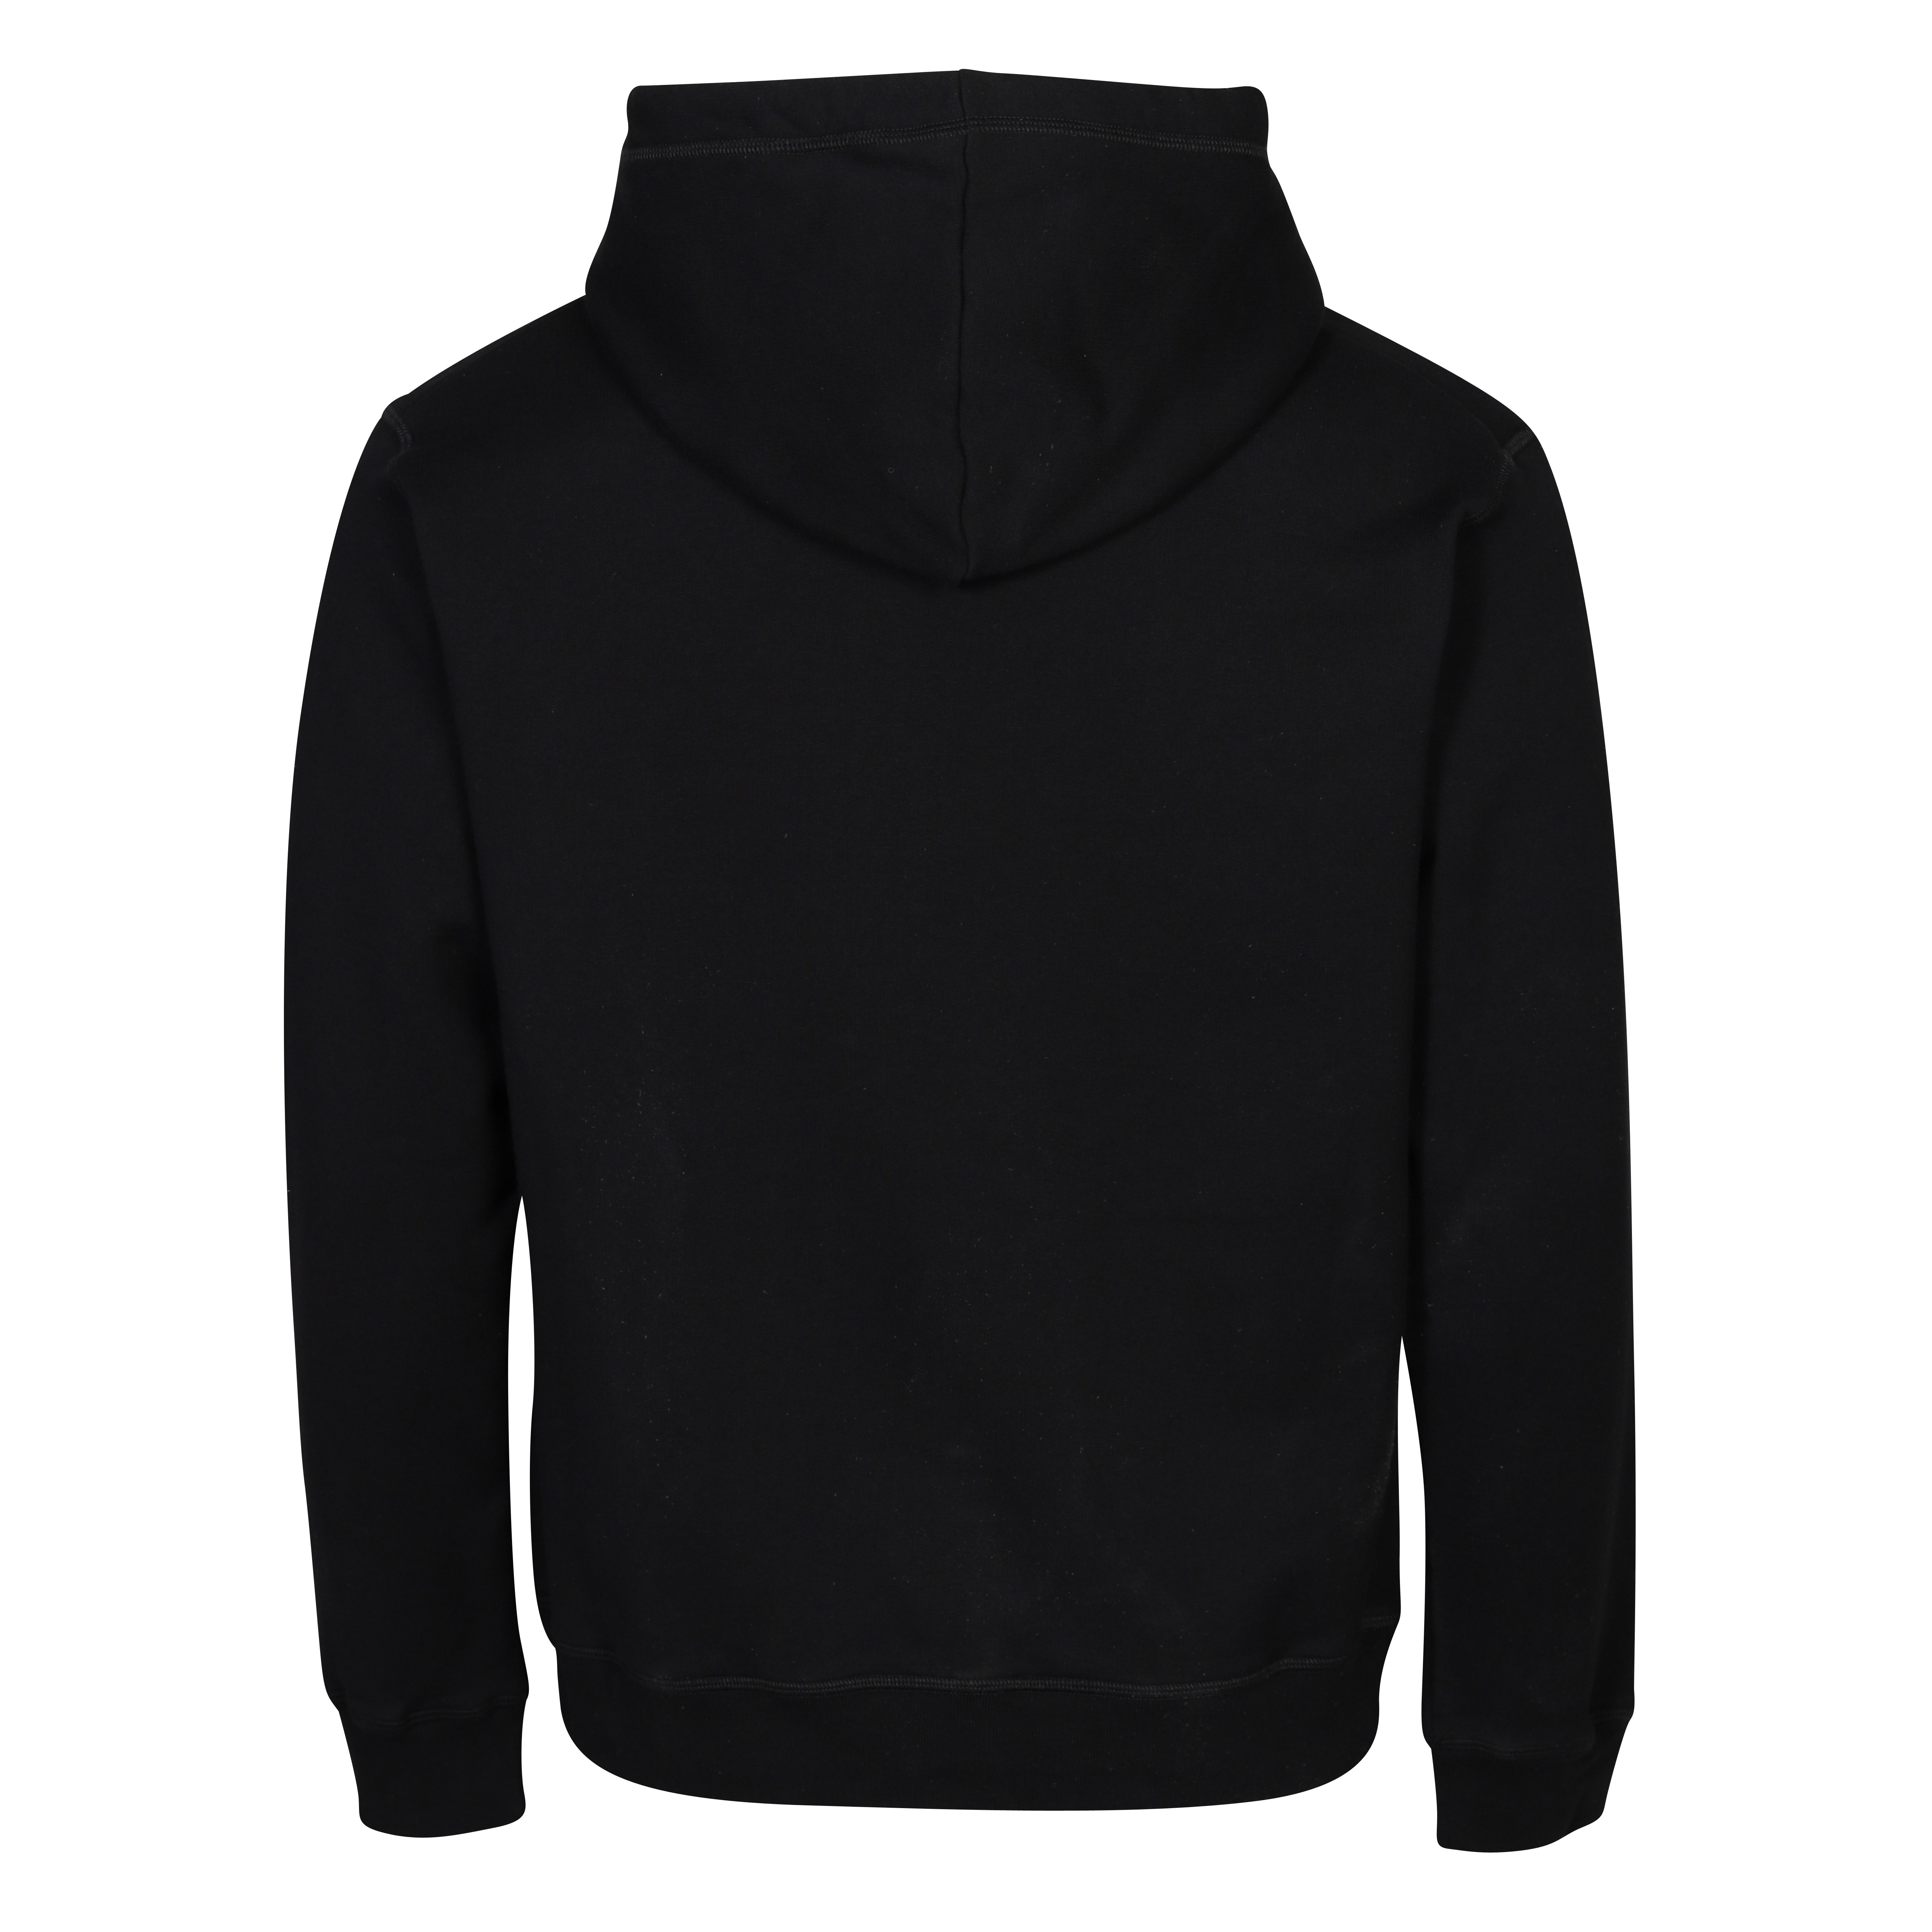 Dsquared Ceresio 9 Cool Hoodie in Black L